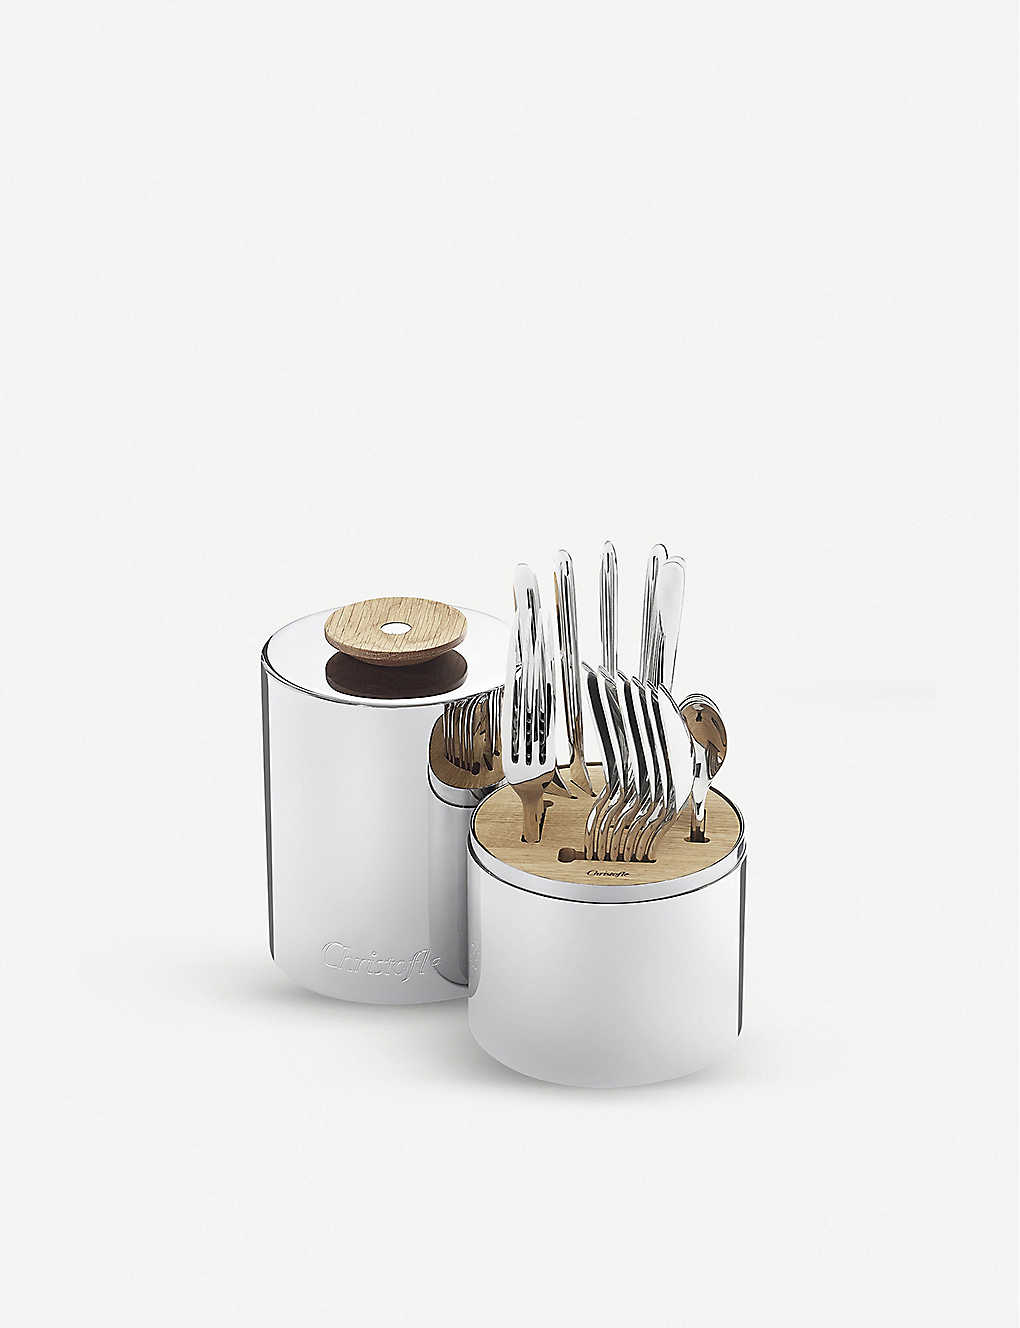 Christofle Essential Cutlery Stainless Steel 24 Piece Set